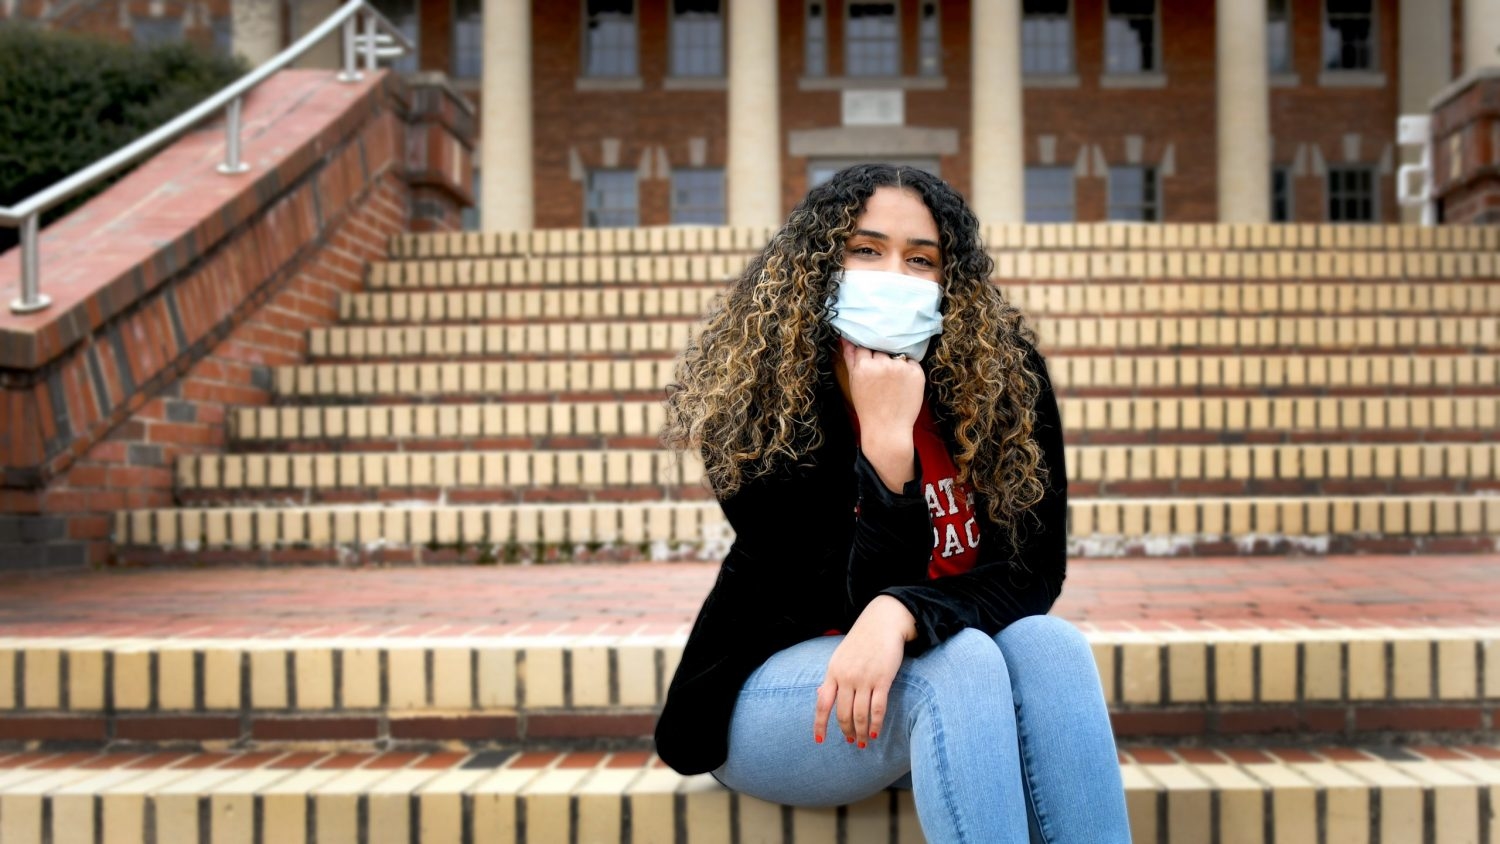 Nataly Vaquez Perez sits on the steps of an NC State building